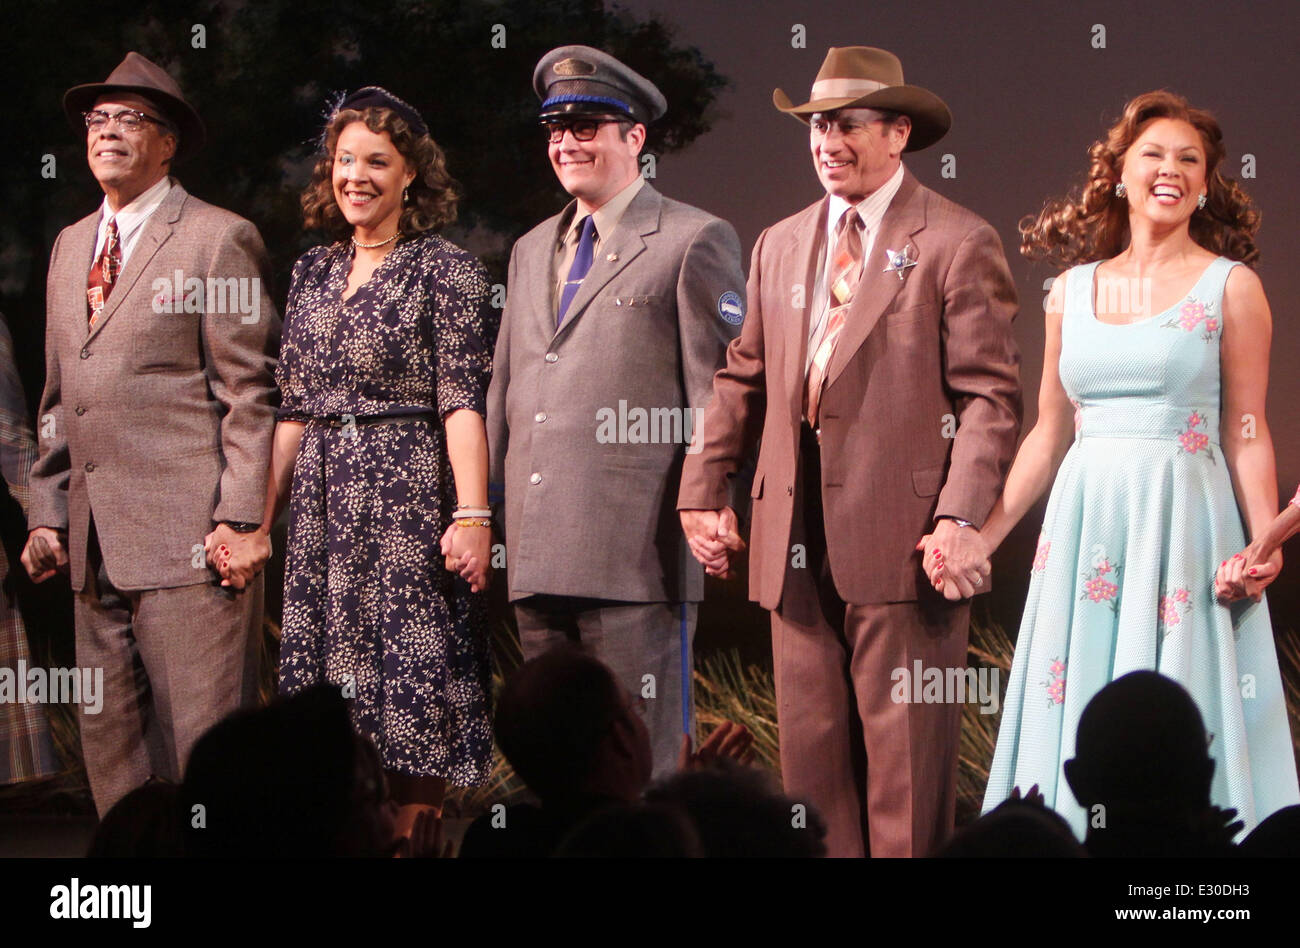 Broadway opening night of 'The Trip To Bountiful' at the Stephen Sondheim Theatre - Curtain Call  Featuring: Leon Addison Brown,Linda Powell,Bill Kux,Tom Wopat,Vanessa Williams Where: New York City, NY, United States When: 23 Apr 2013 Stock Photo